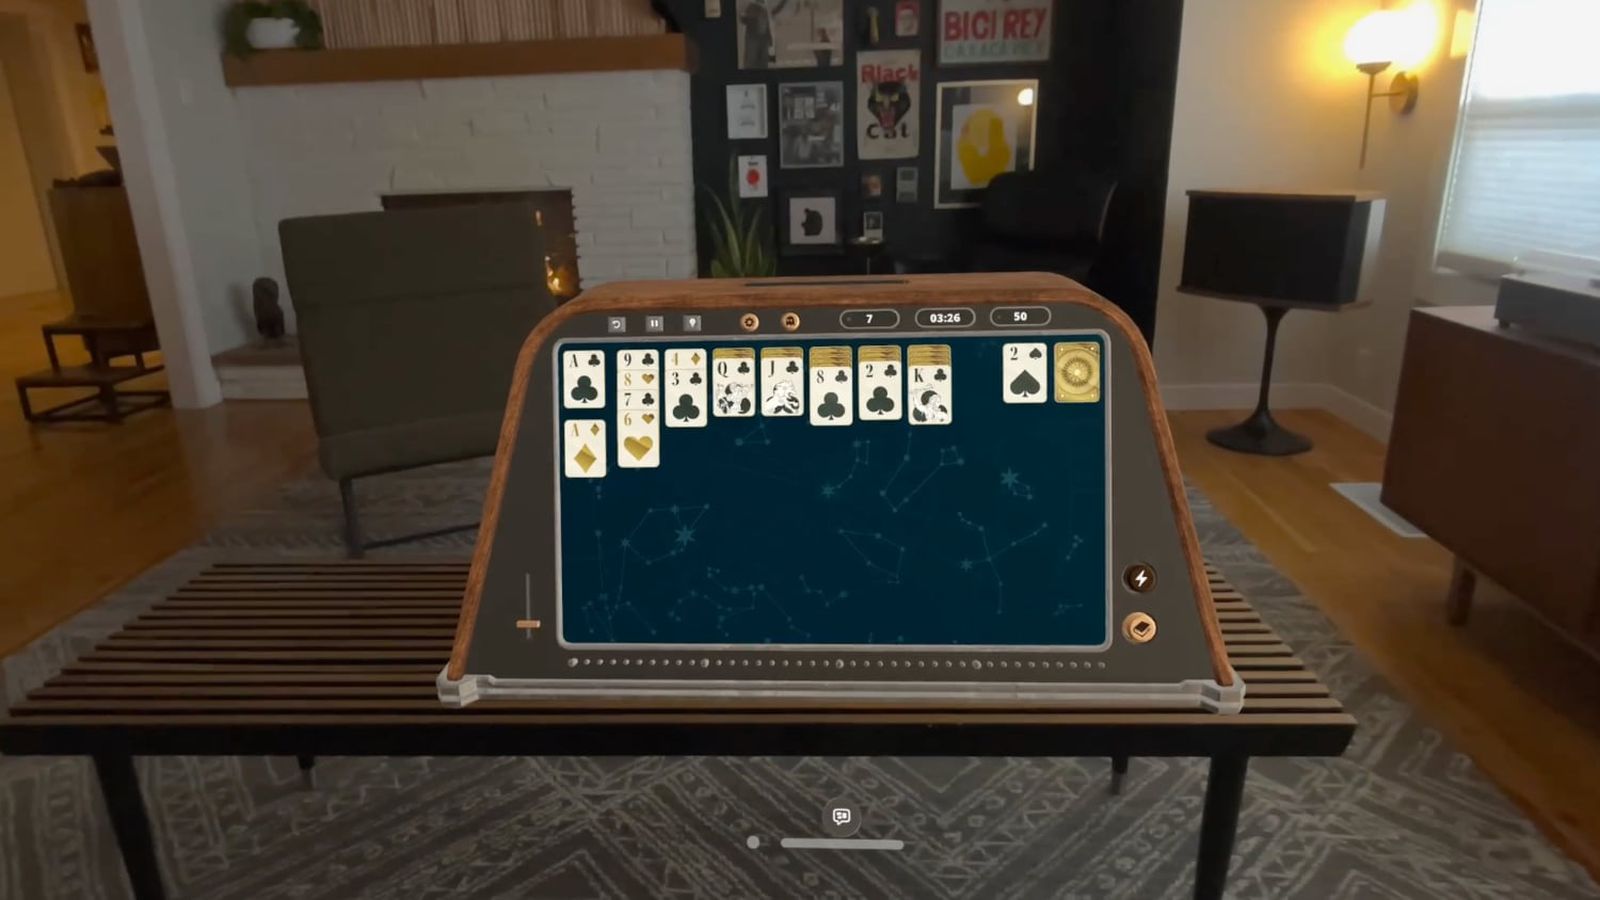 From iPhoneIslam.com, a virtual solitaire game playing on an augmented reality device in a modernly decorated living room during the week of April 19-25.